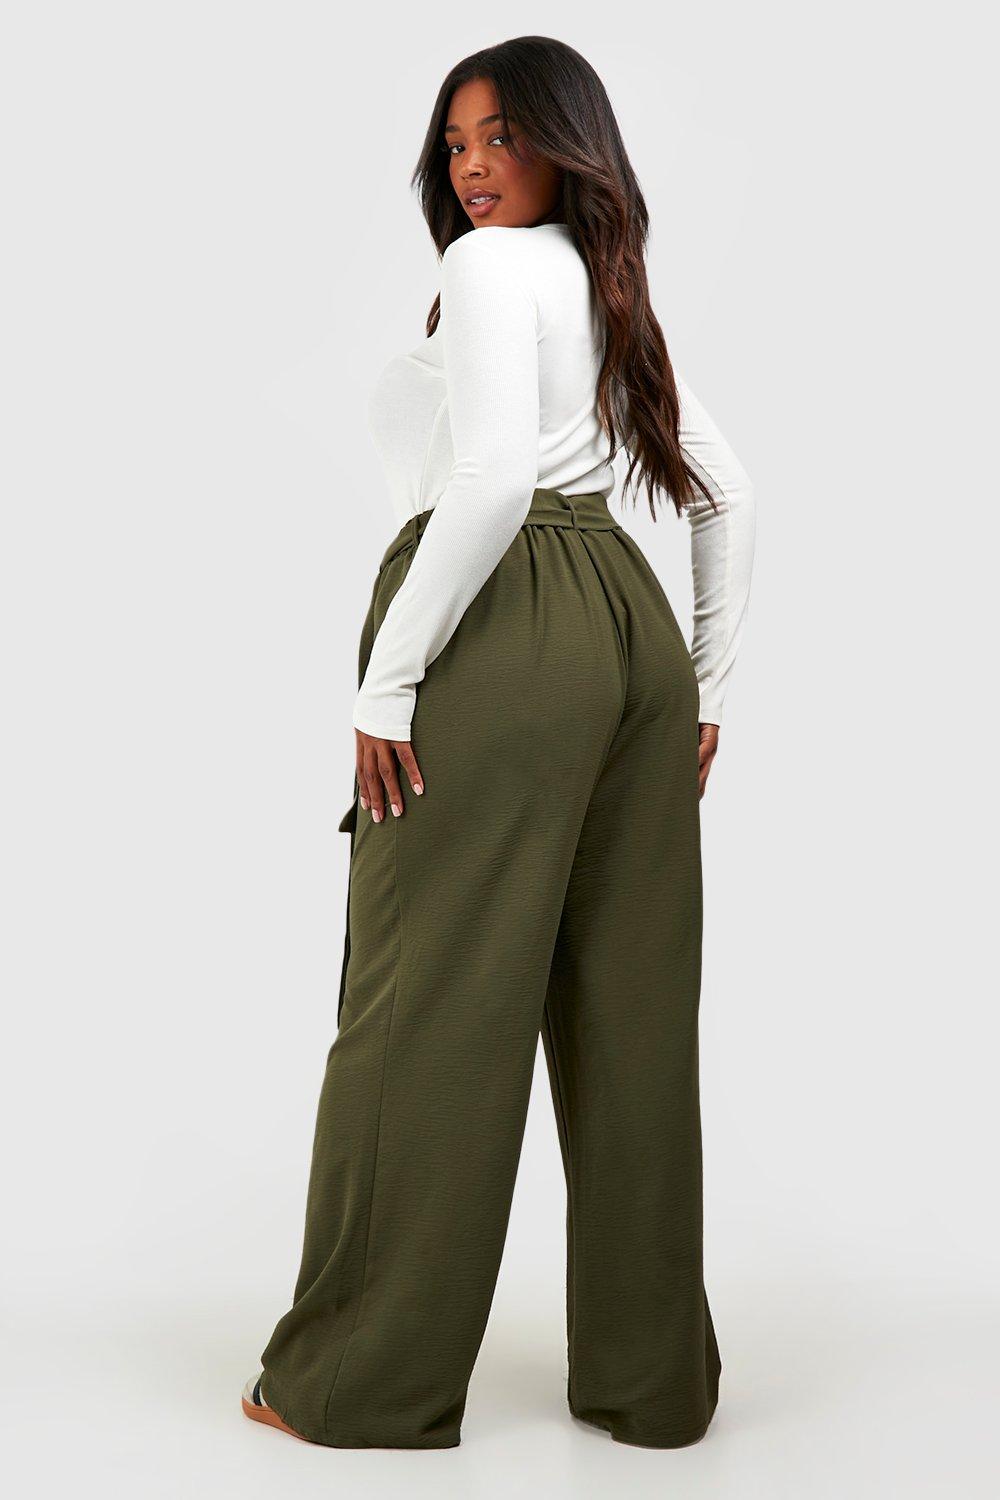 Women's Plus Woven Textured Belted Wide Leg Trousers